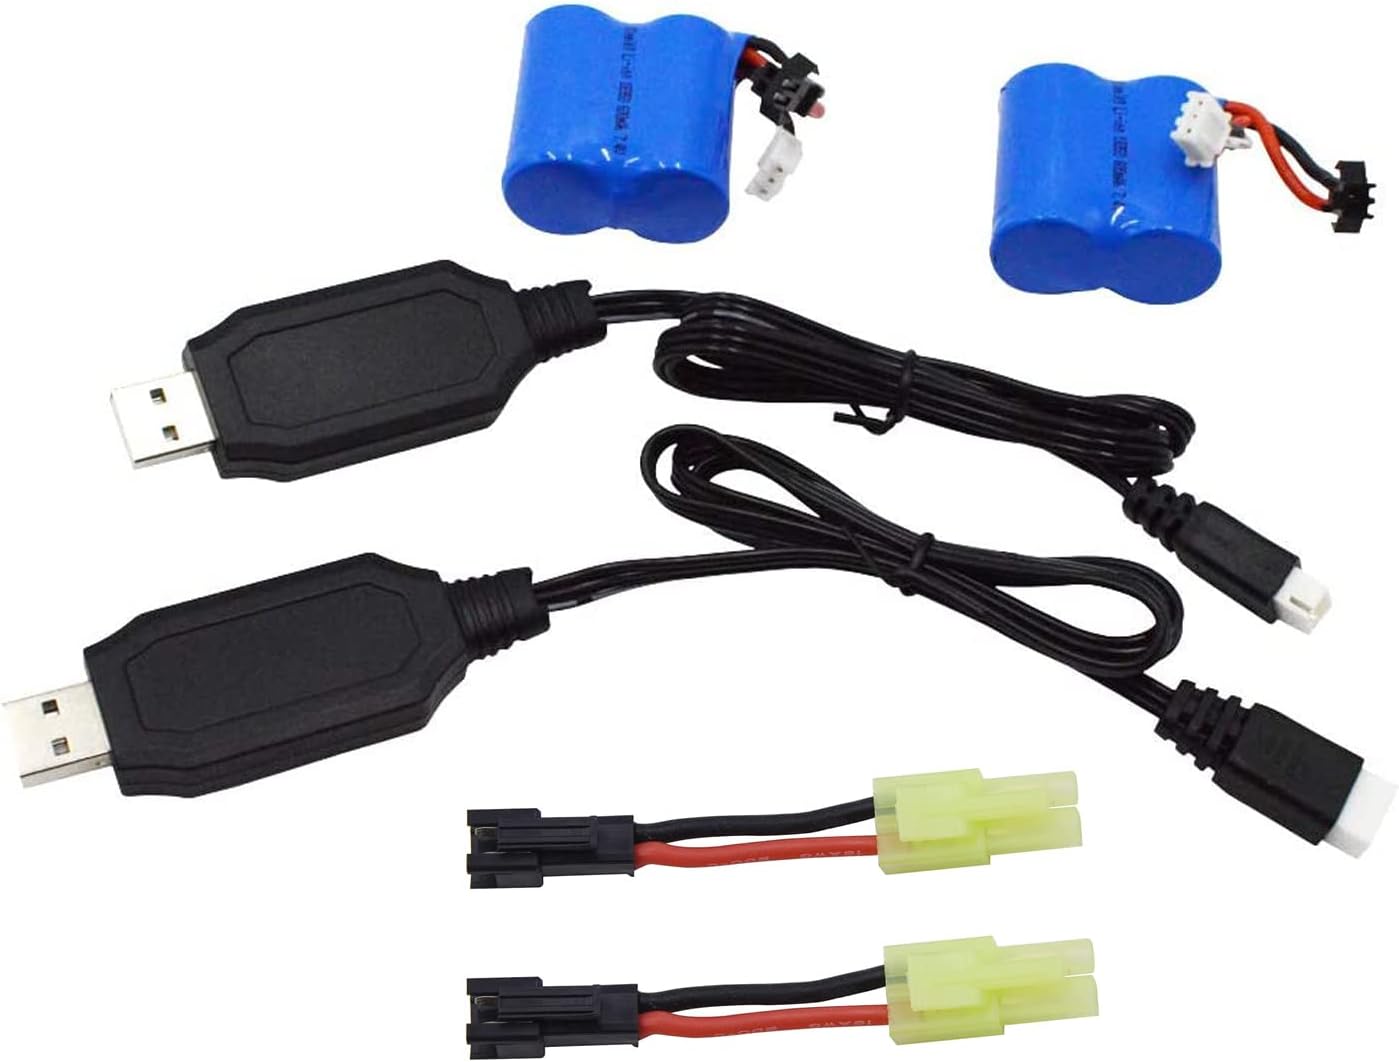 Blomiky 2 Pack 7.4V 600mAh Battery and Charger Cable: A Powerful Combo for Your RC Boat